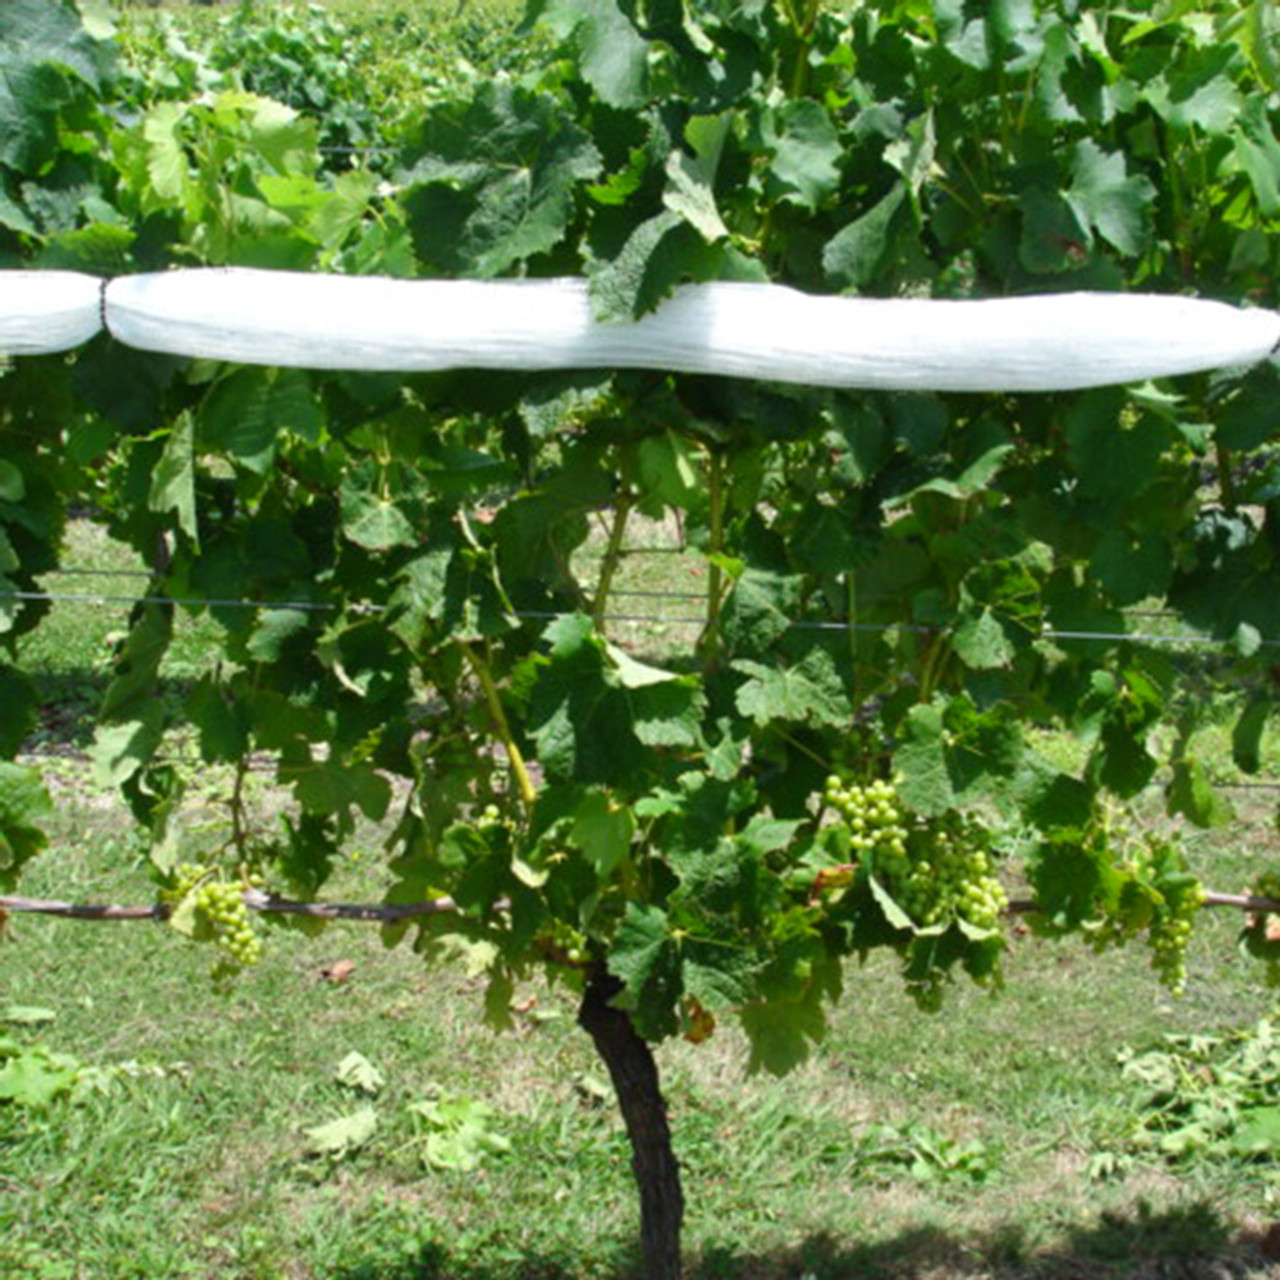 TightLoch is available in white and black colors.  White nets tend to keep birds out of the vineyard.